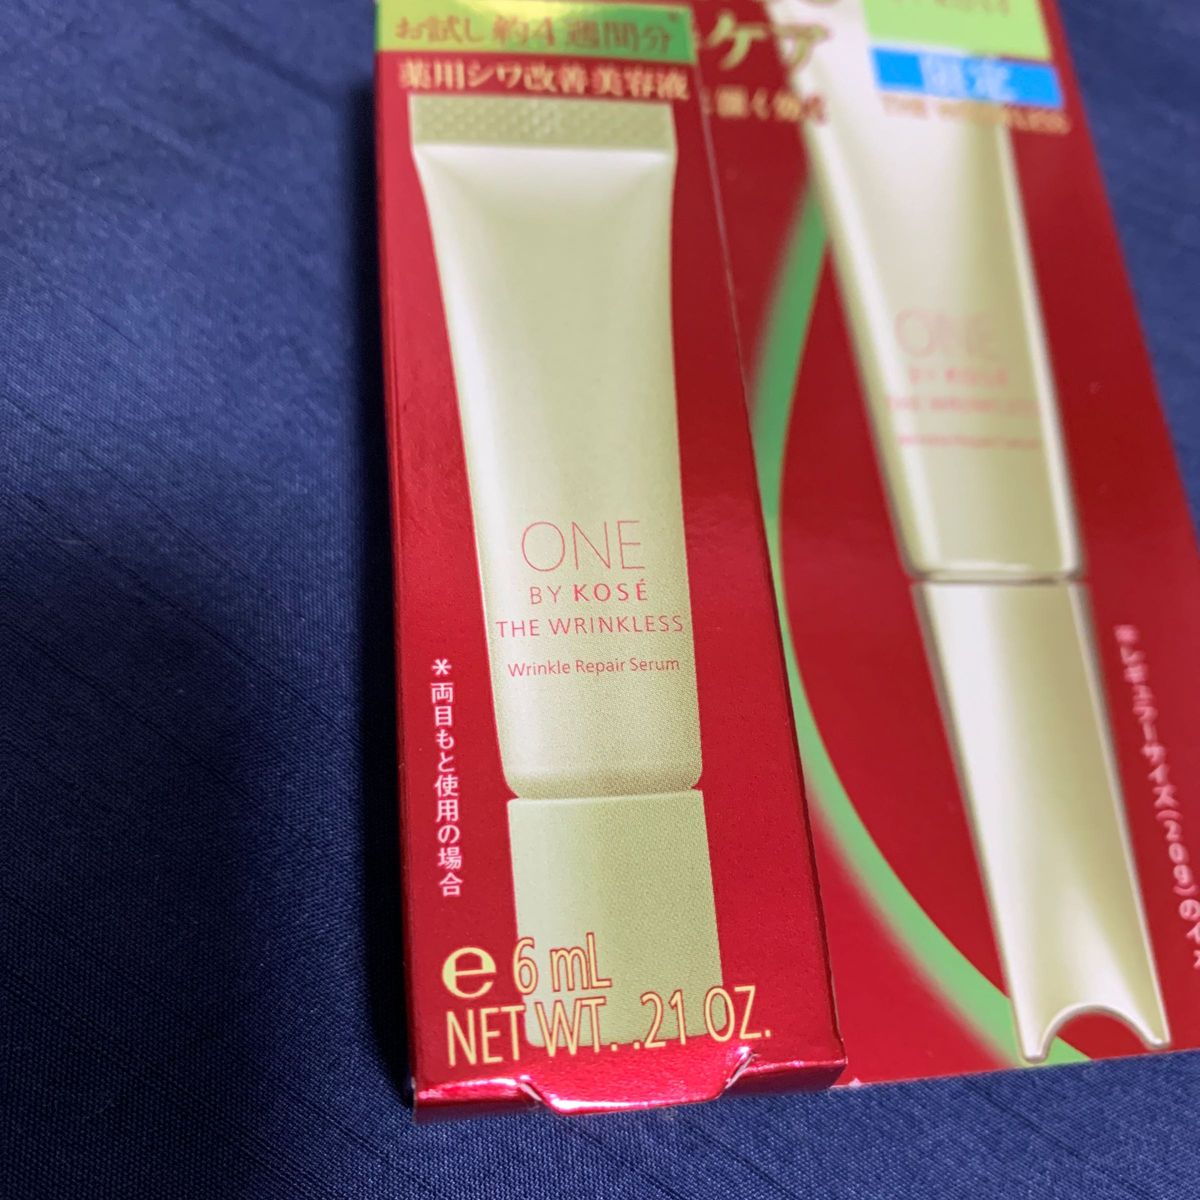 ONE BY KOSE ザ リンクレス S 6g（医薬部外品）【限定サイズ】 薬用シワ改善美容液